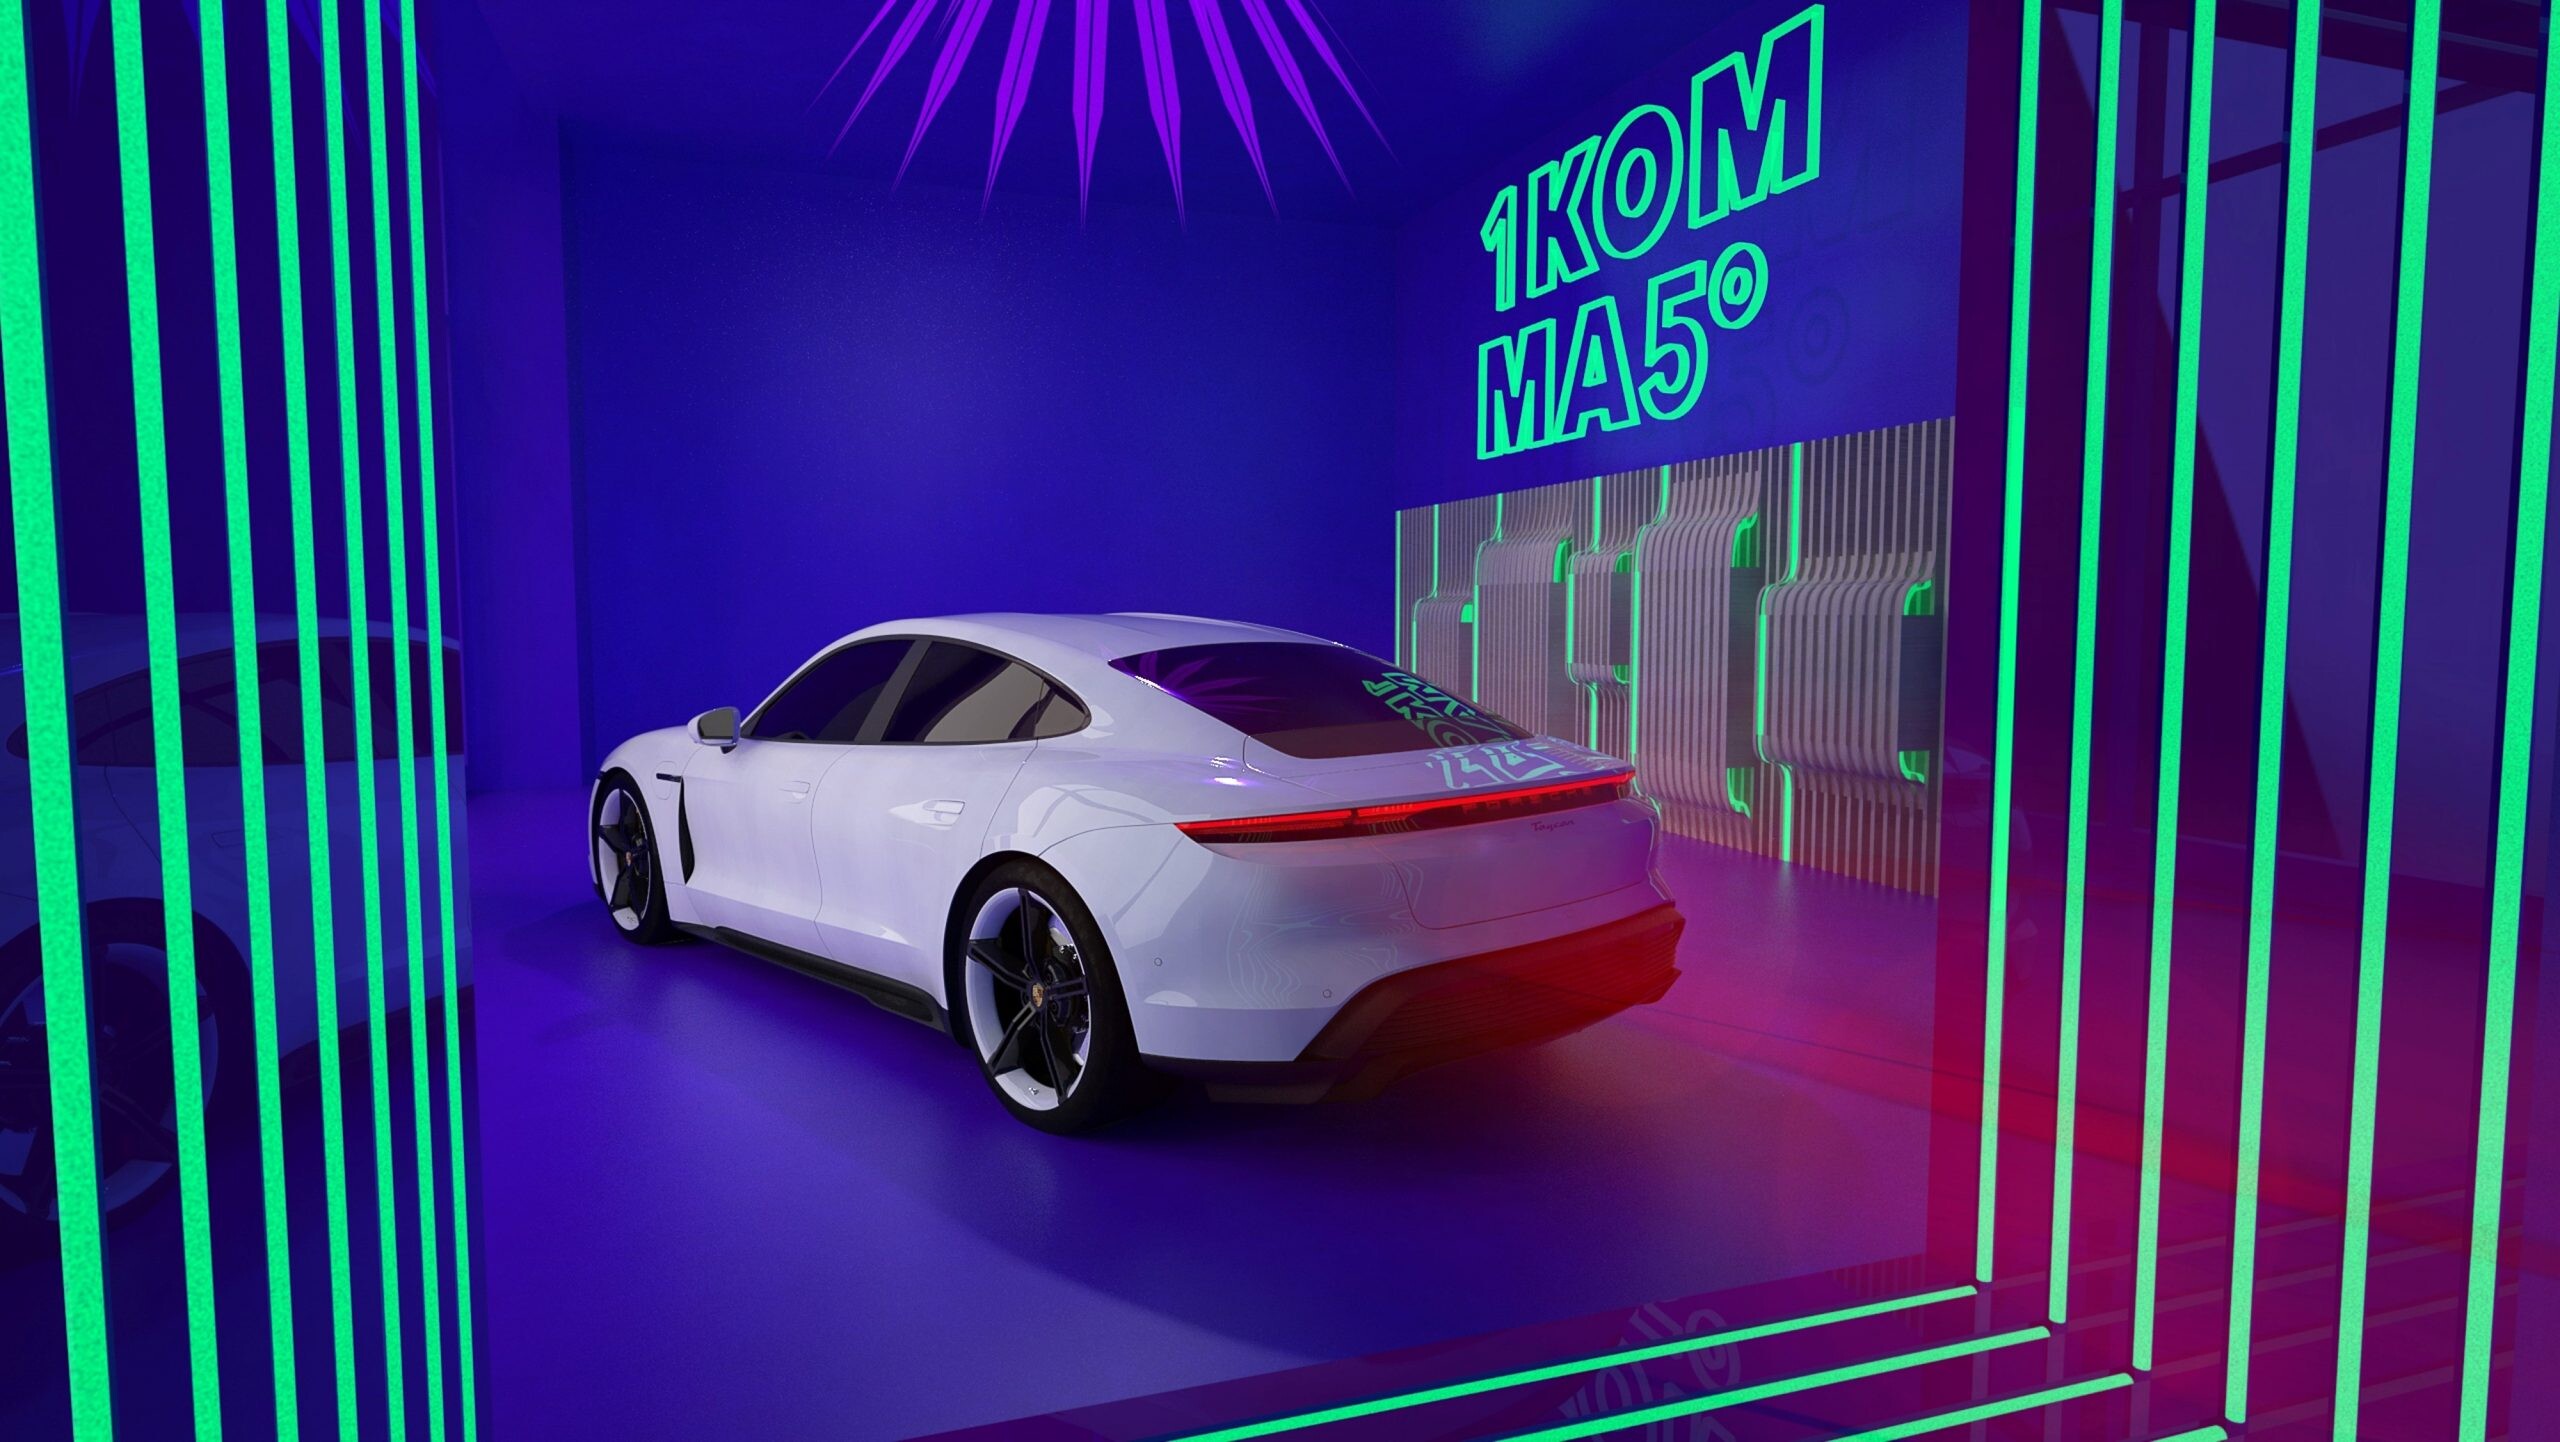 Porsche gets on board with energy start-up 1KOMMA5?